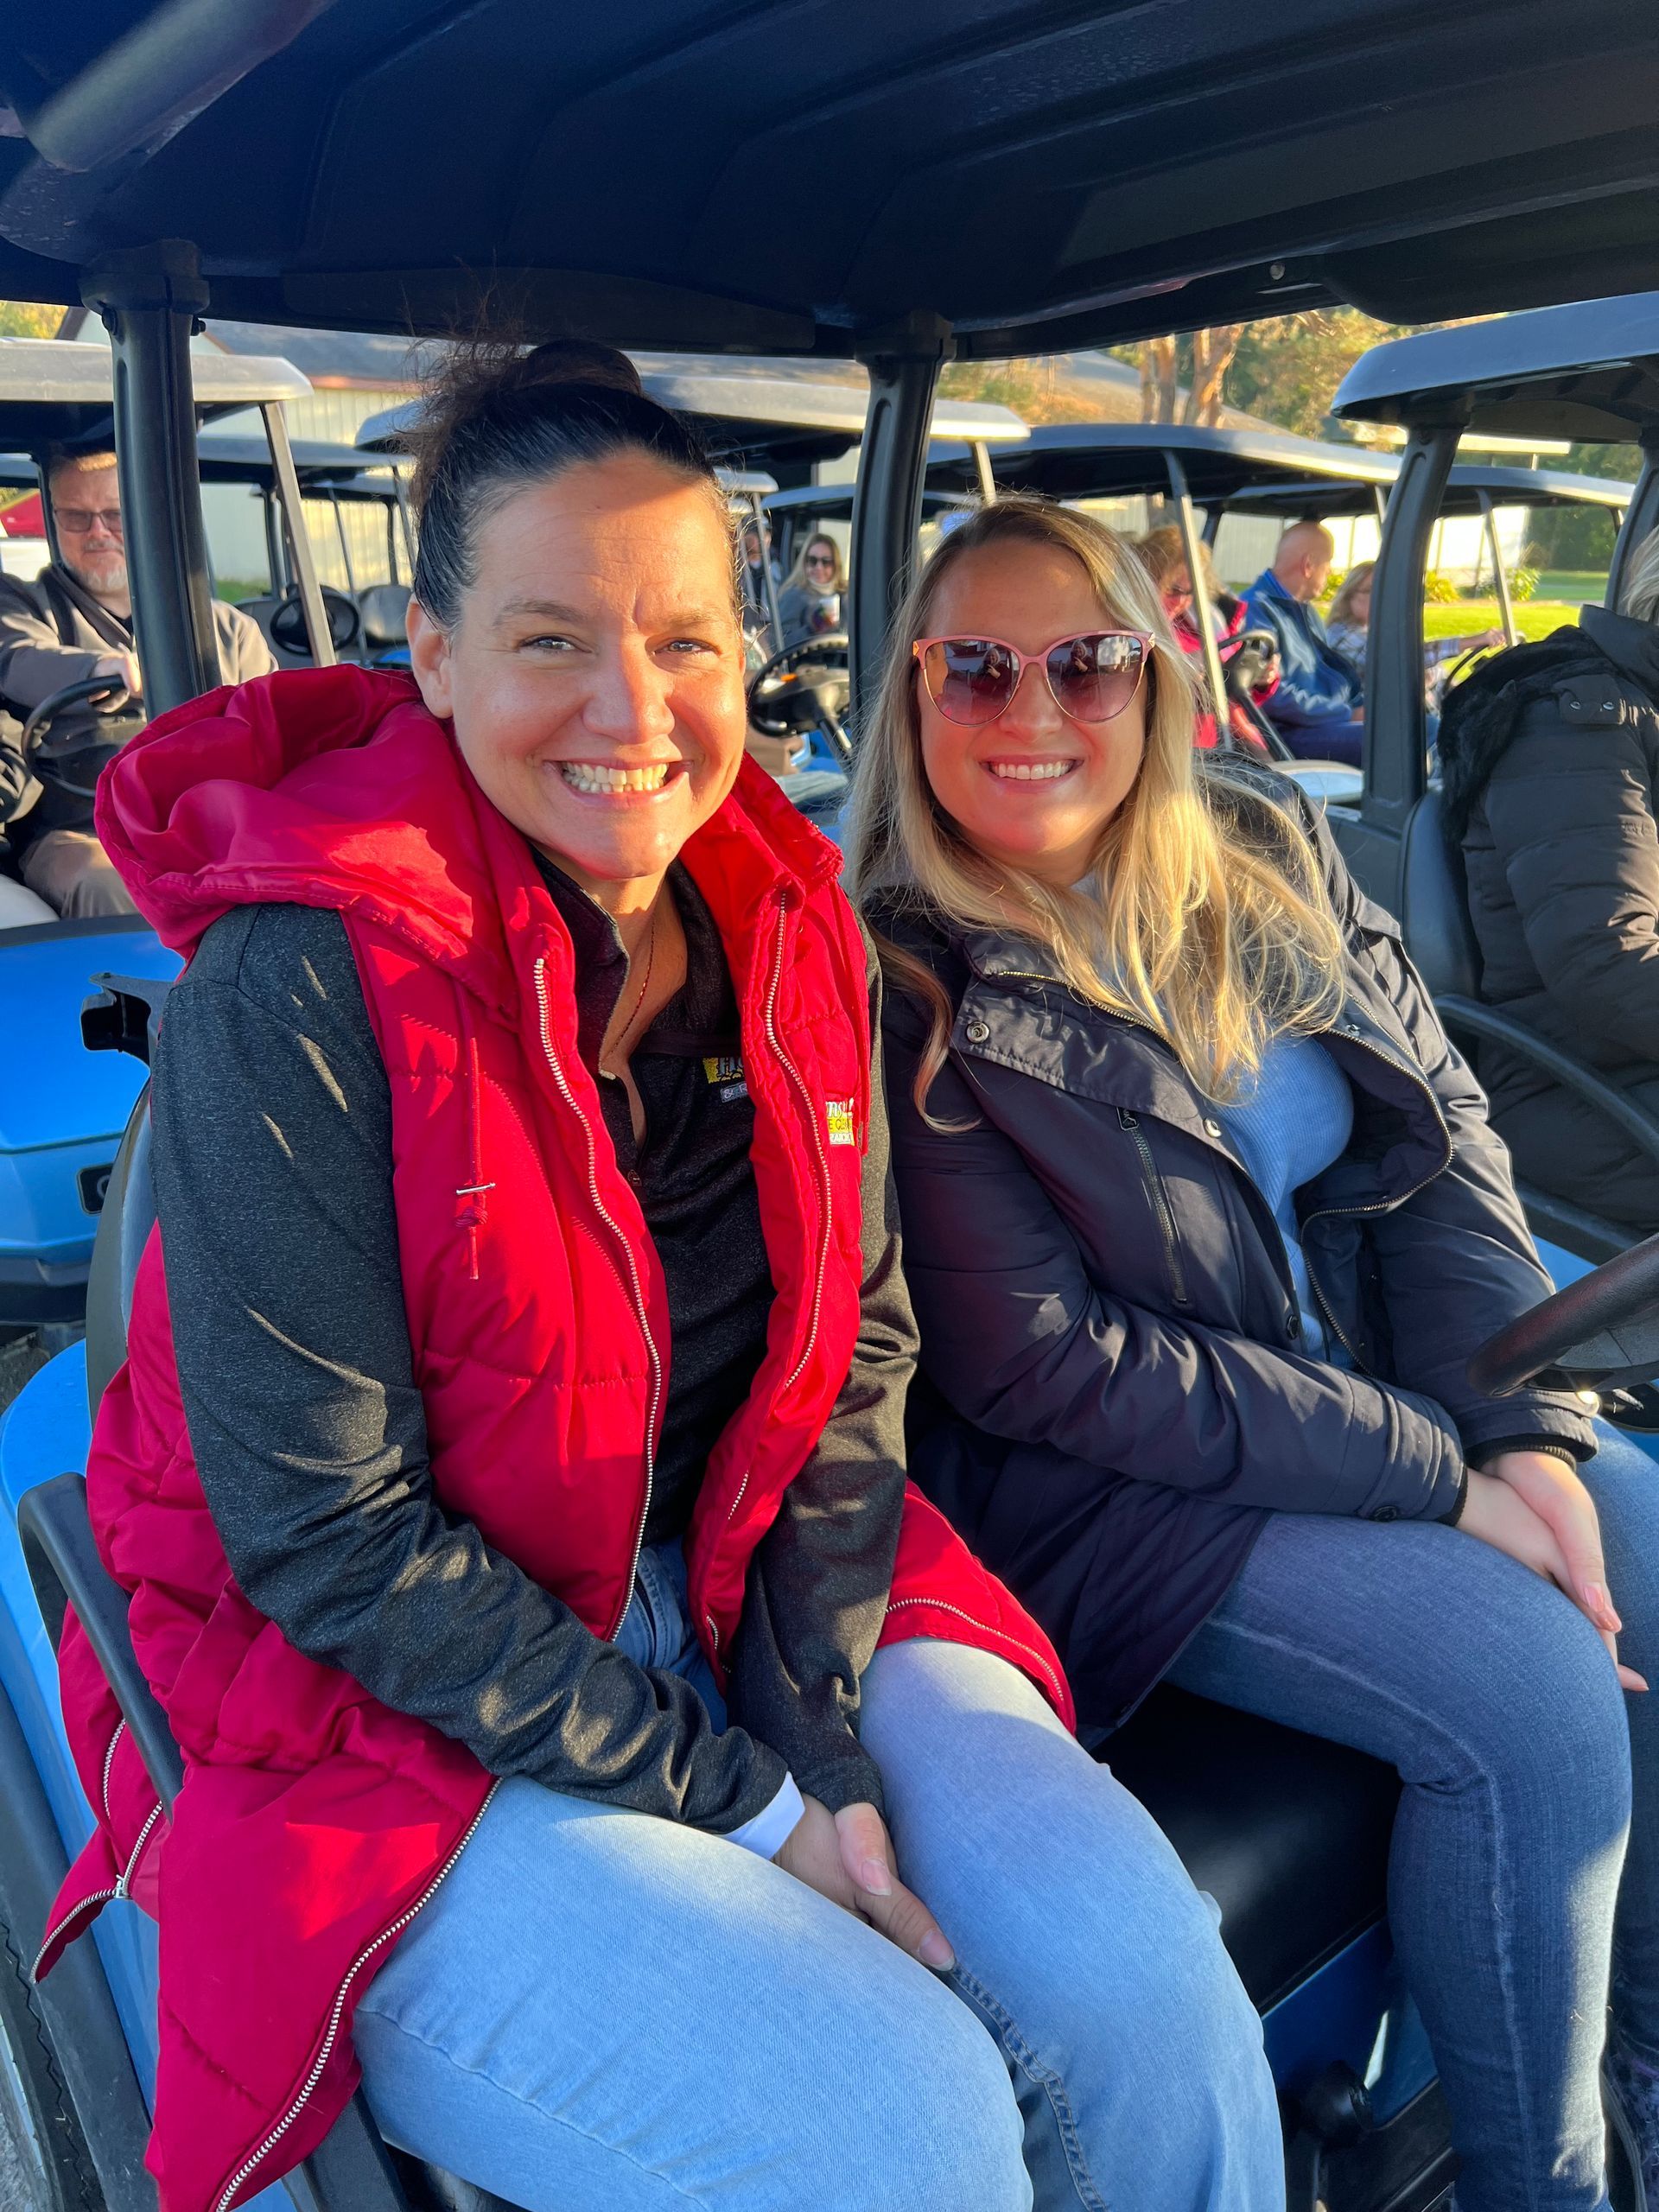 Two women are sitting in a golf cart and smiling for the camera